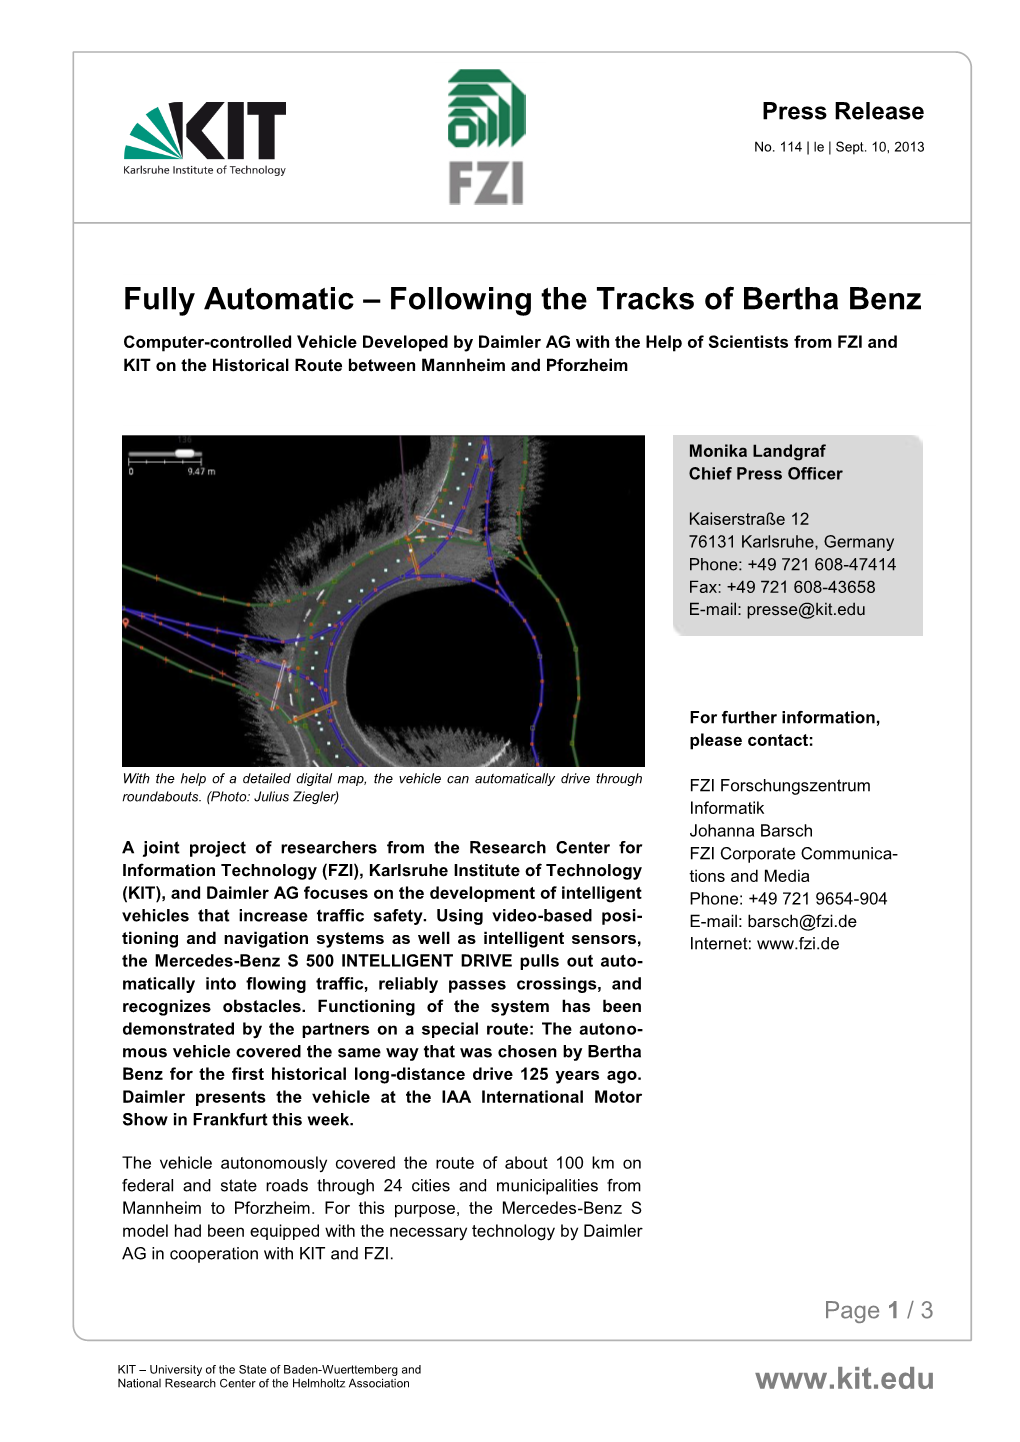 Fully Automatic – Following the Tracks of Bertha Benz